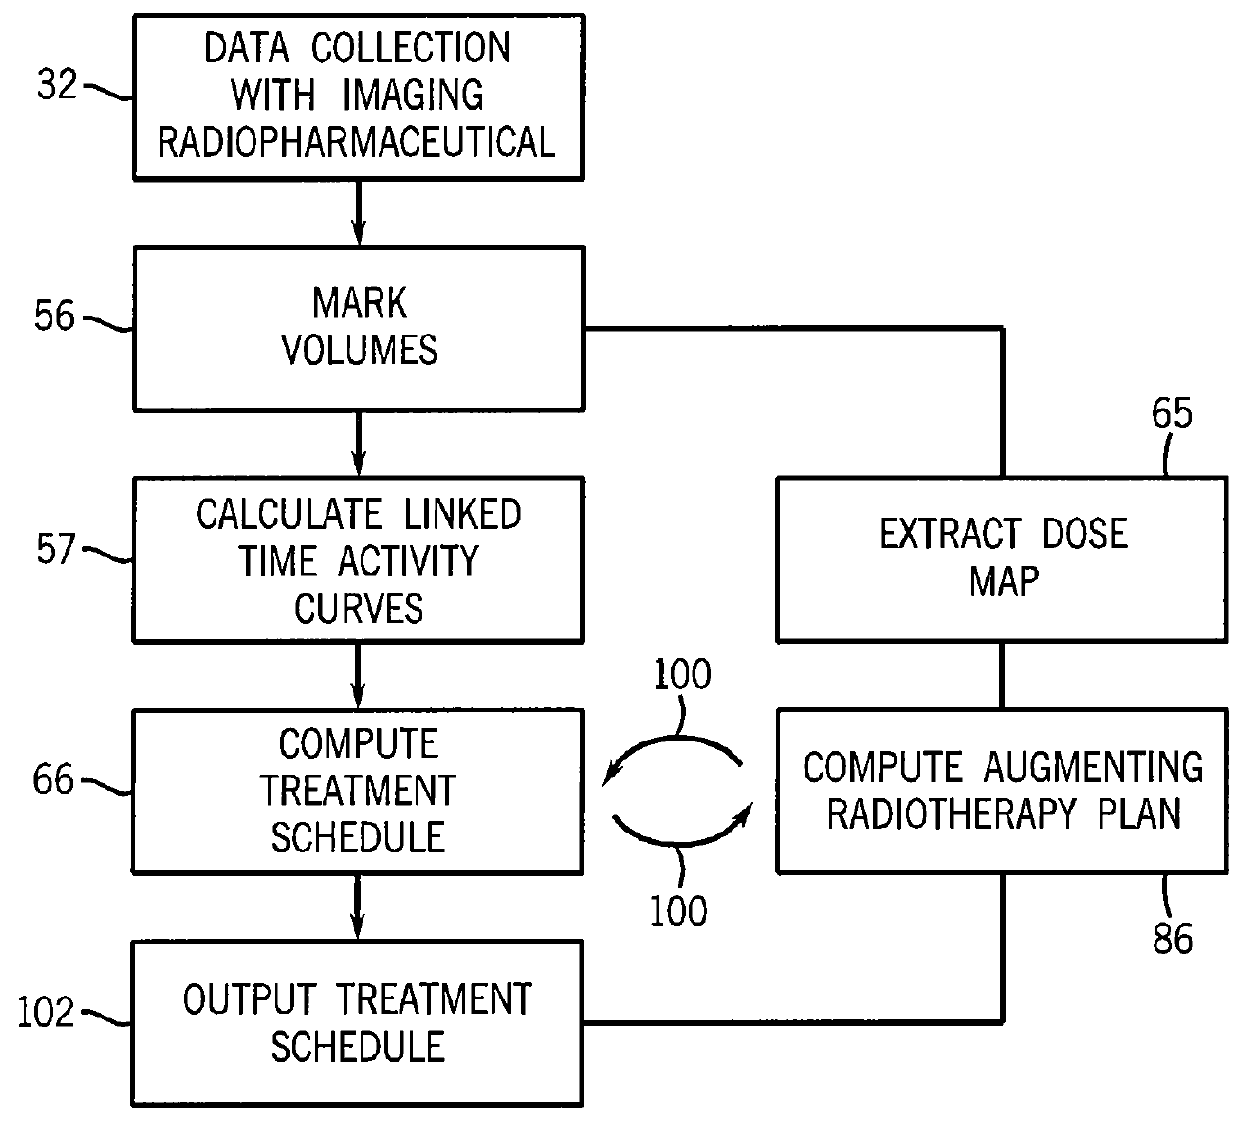 Treatment planning system for radiopharmaceuticals